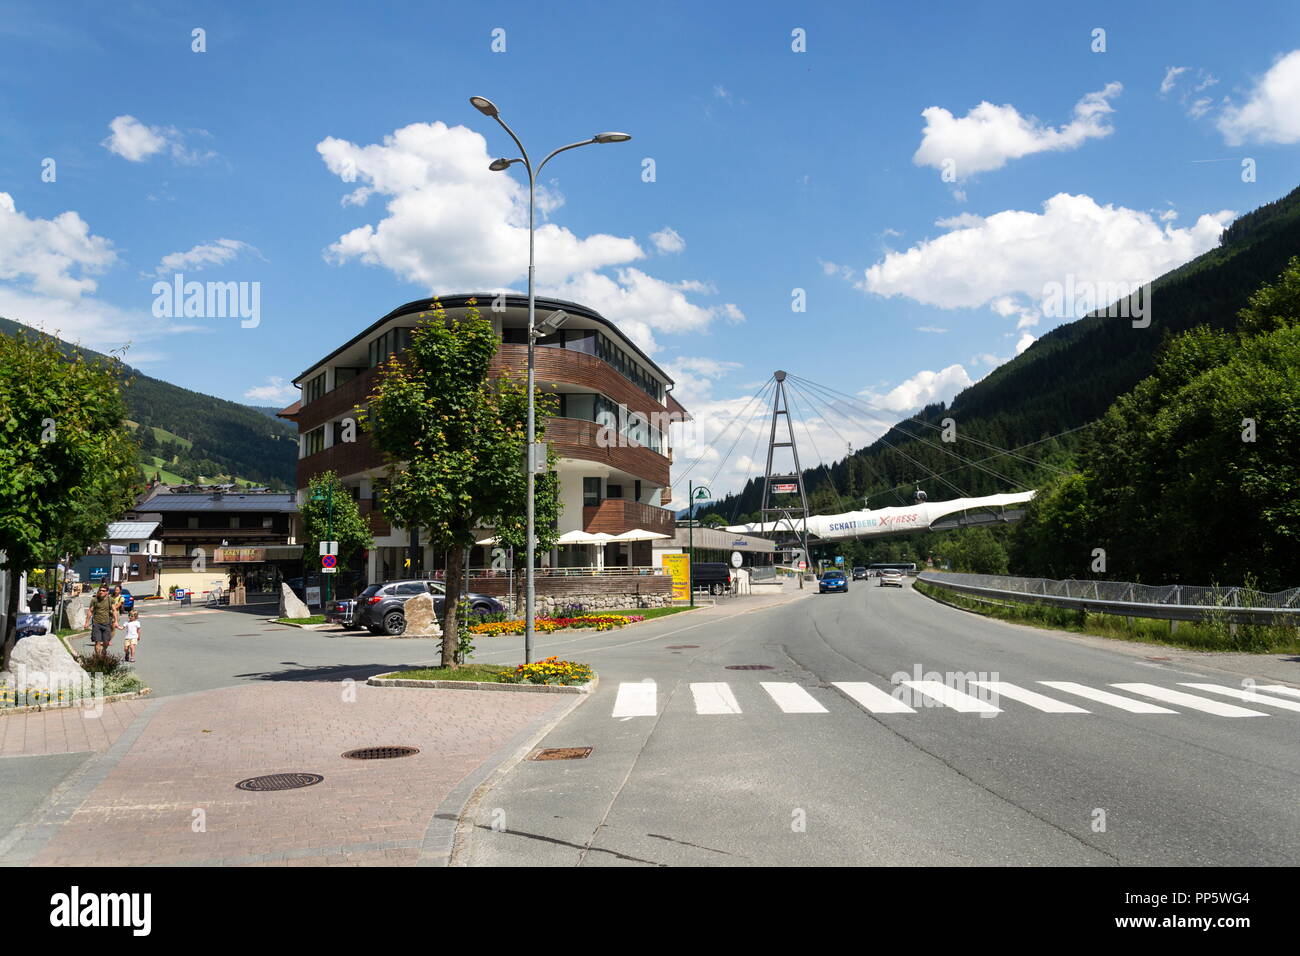 SAALBACH-HINTERGLEMM, AUSTRIA - JUNE 22 2018: People in front of Schattberg X-Press cable car over X-line bikers trail on June 22, 2018 in Saalbach-Hi Stock Photo